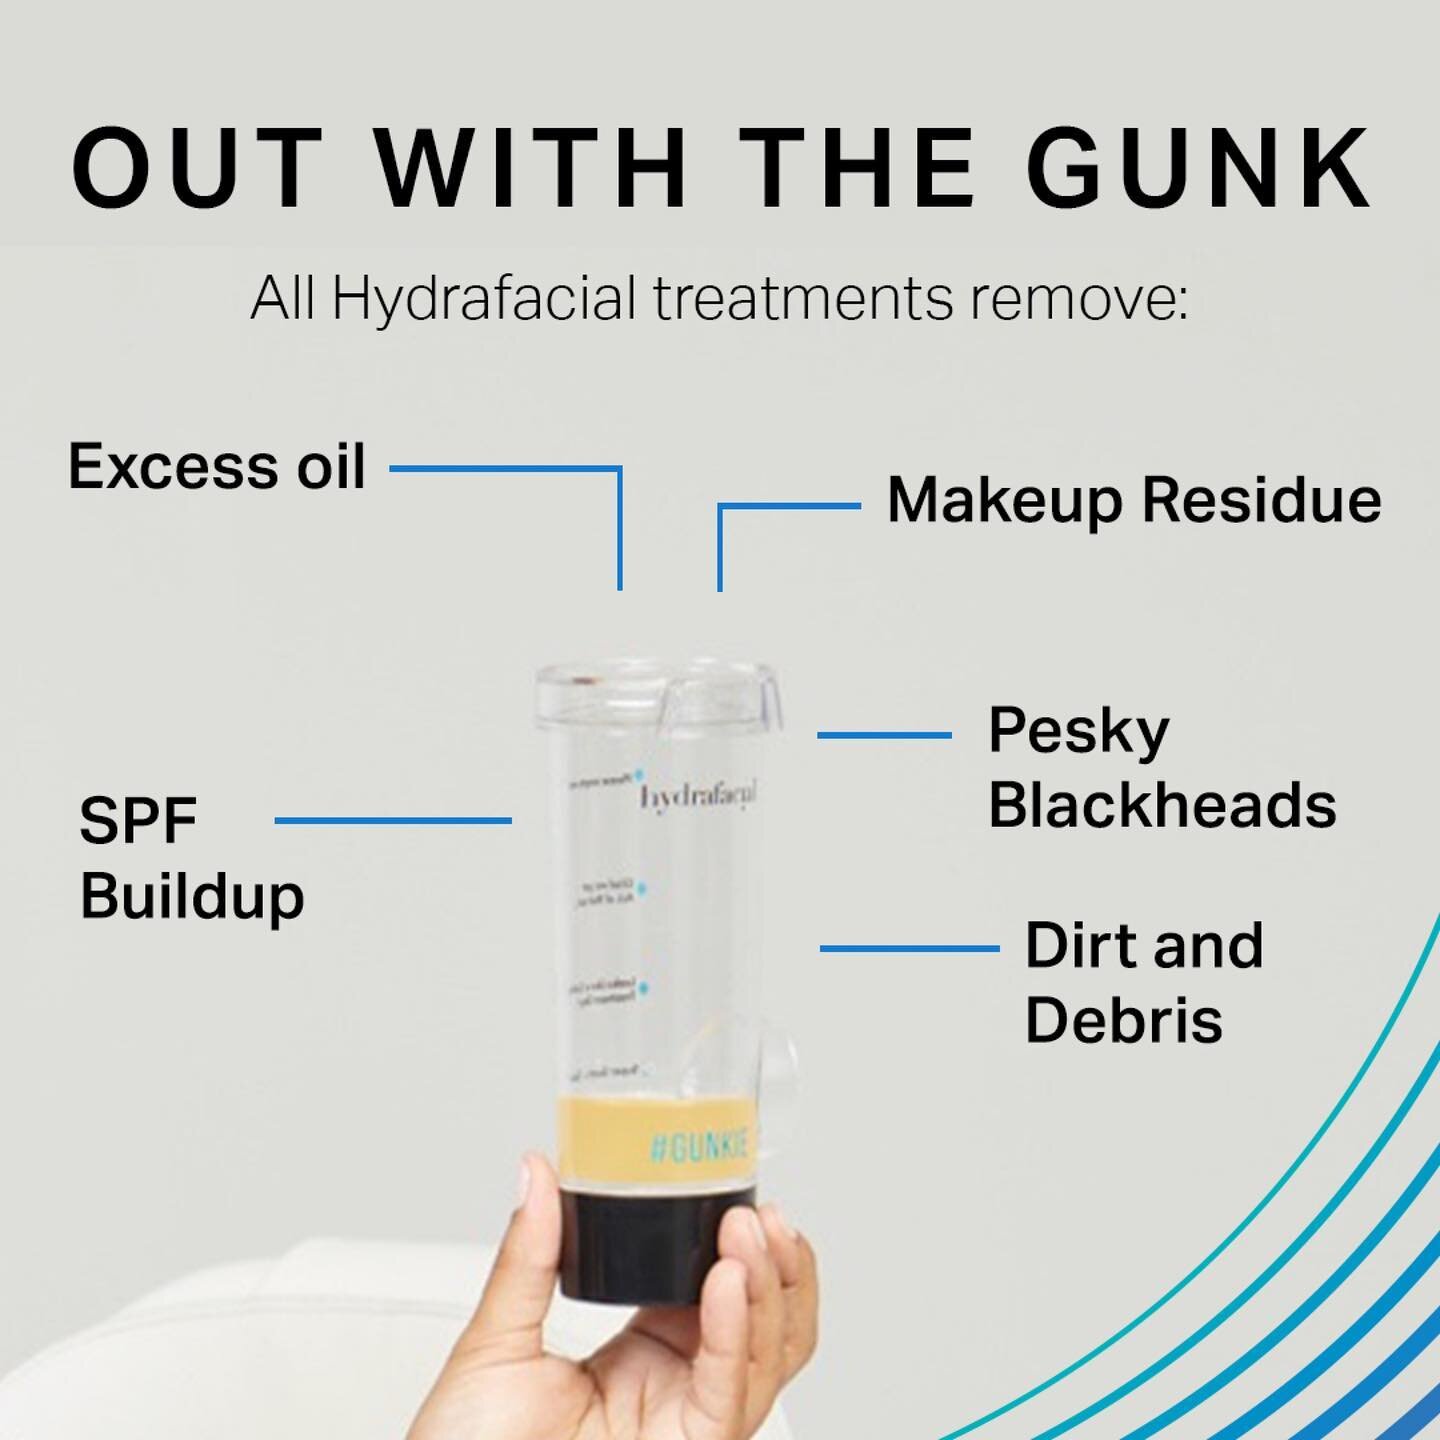 HALF PRICE 45 minute Hydrafacial with Kelly available tomorrow due to cancellation. 
・・・
What's in your Gunkie? 🔎

Gunkie jars are filled with a range of impurities, from blackheads to makeup residue. That's we recommend monthly Hydrafacials to help